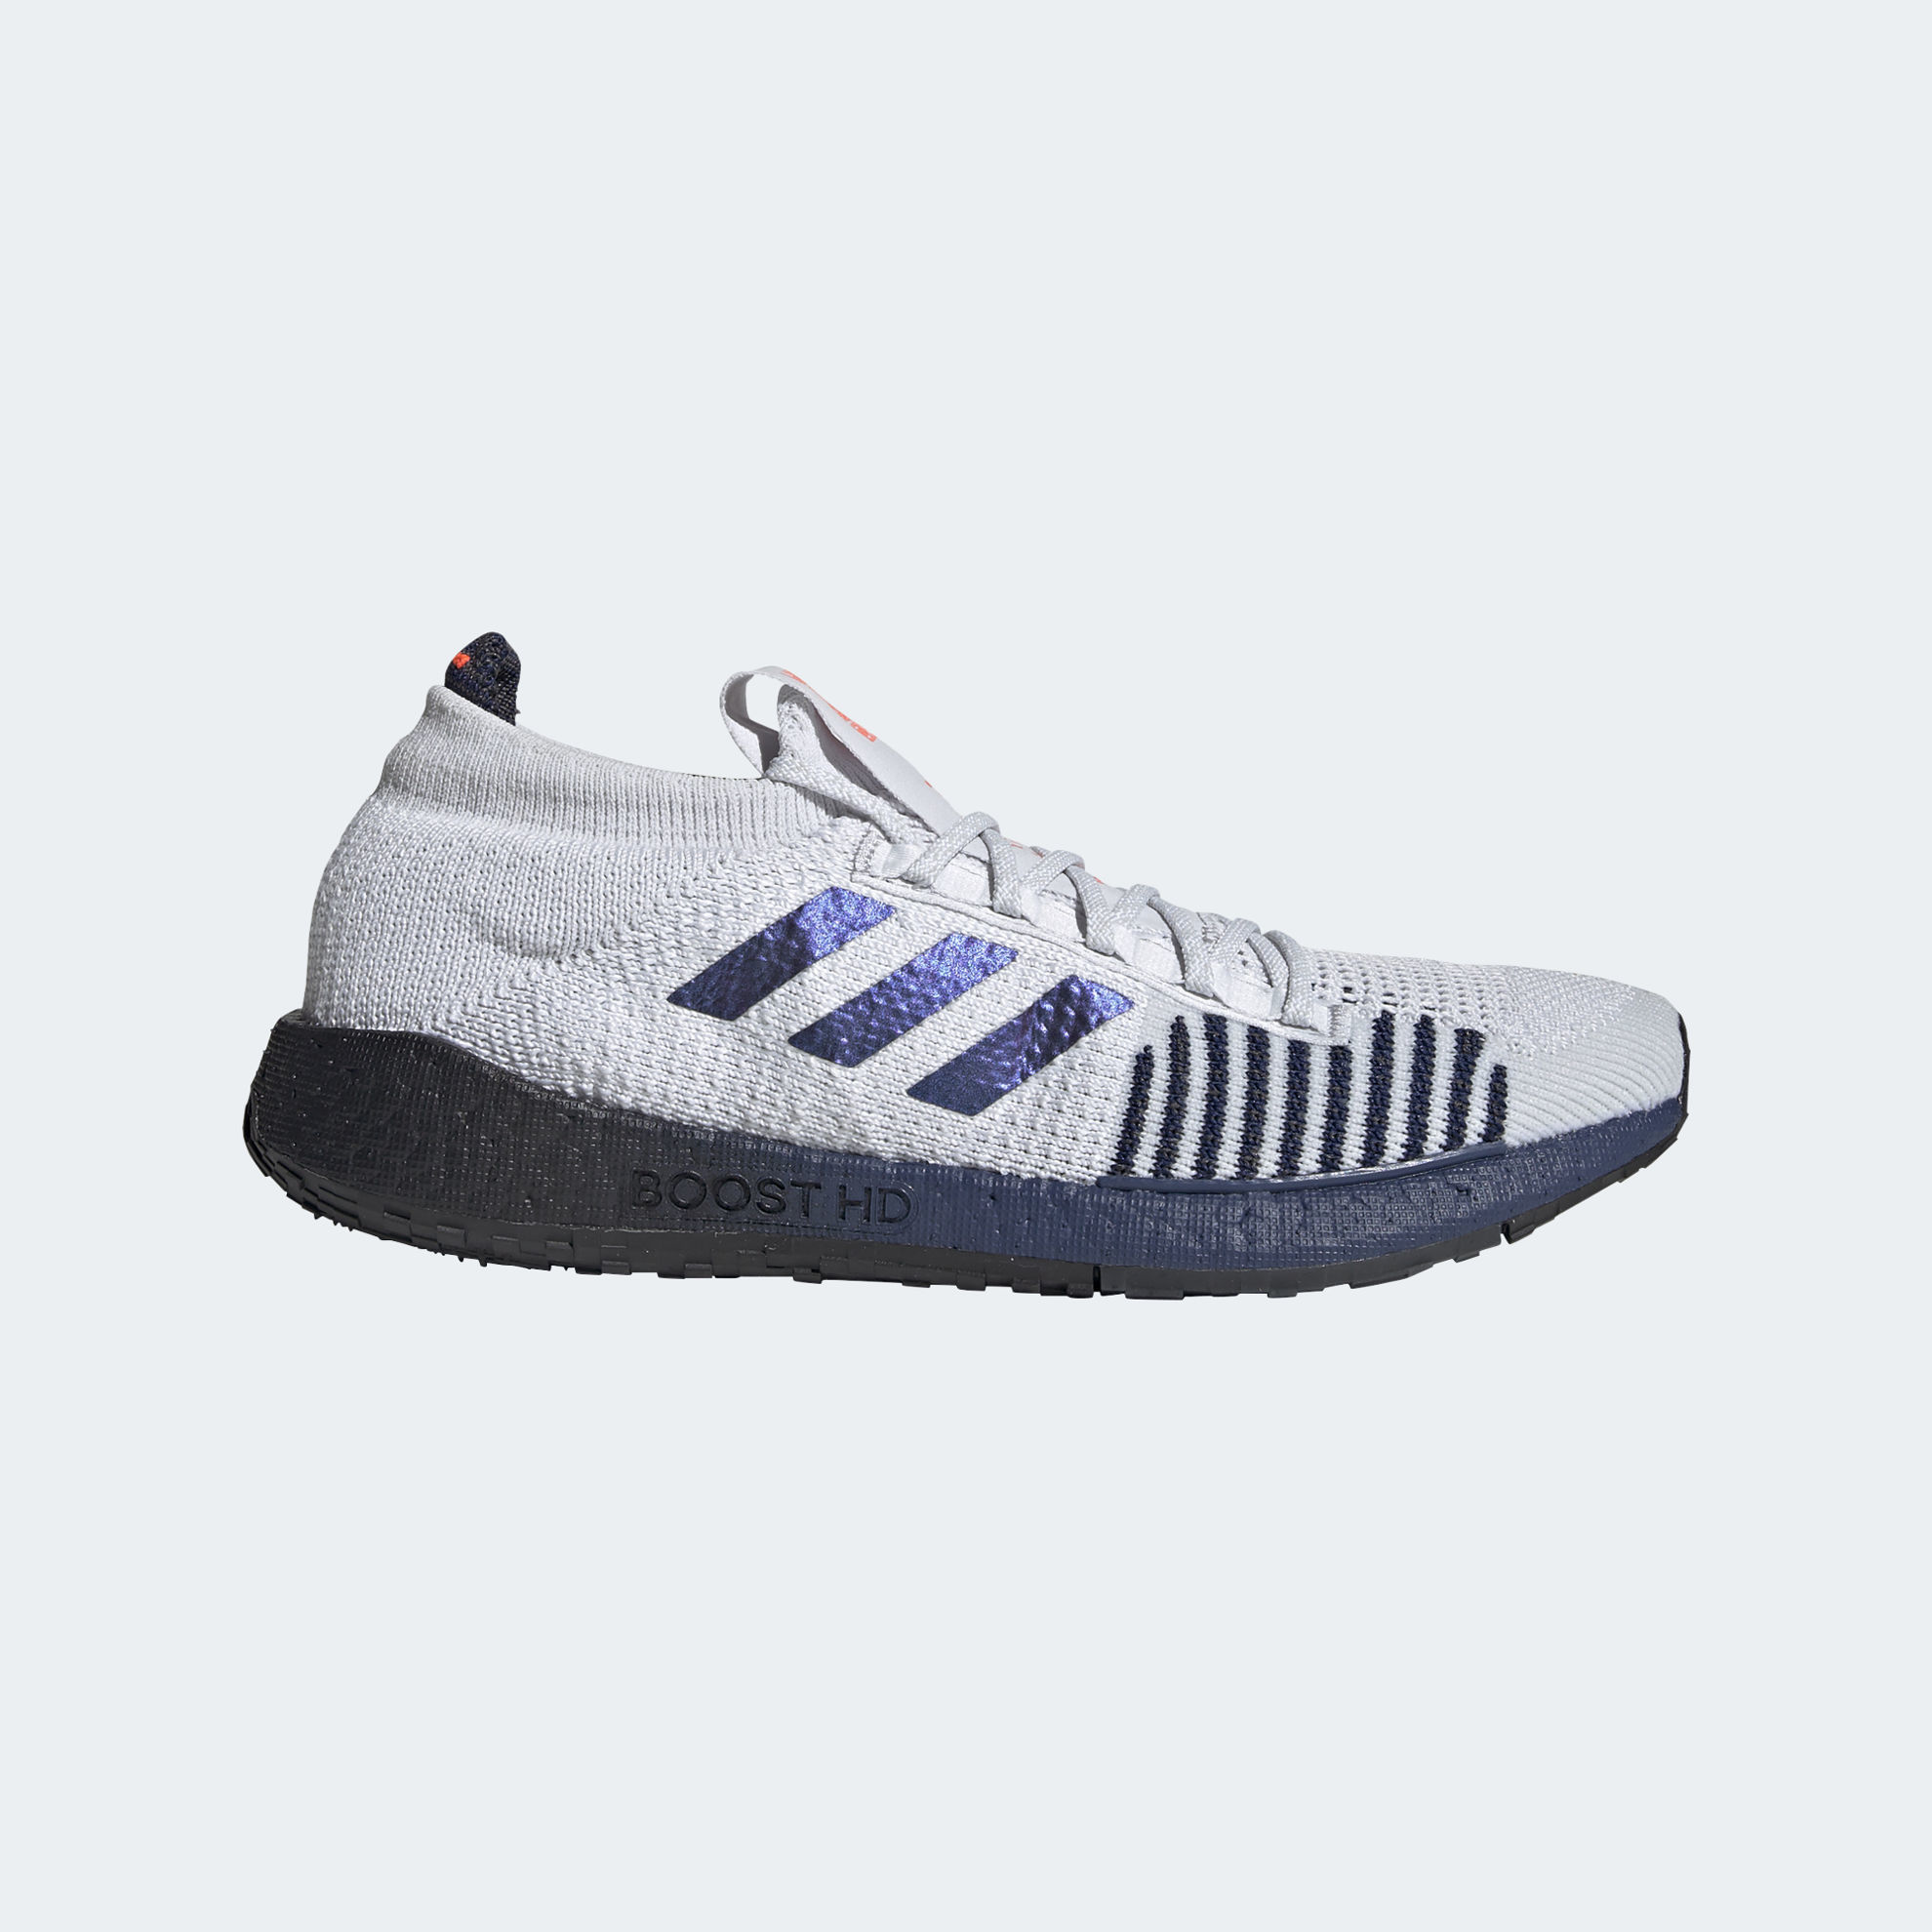 boost hd shoes